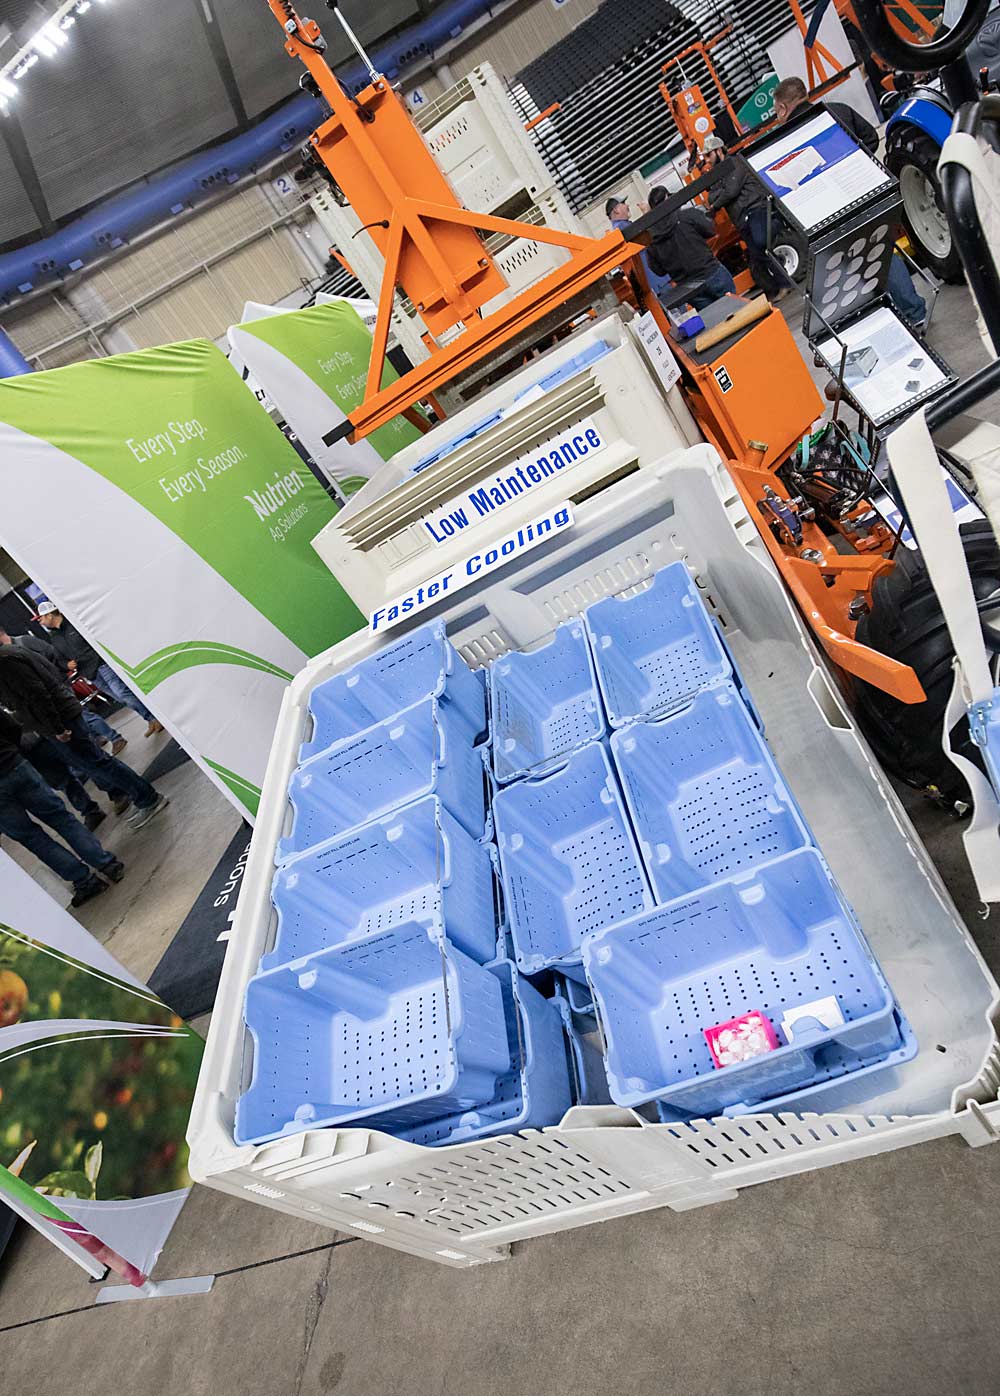 New in-bin tote system on display during the first day of the Washington State Tree Fruit Association's NW Hort Expo on Monday, December 6, 2021 at the Yakima Valley SunDome in Yakima, Washington. (TJ Mullinax/Good Fruit Grower)